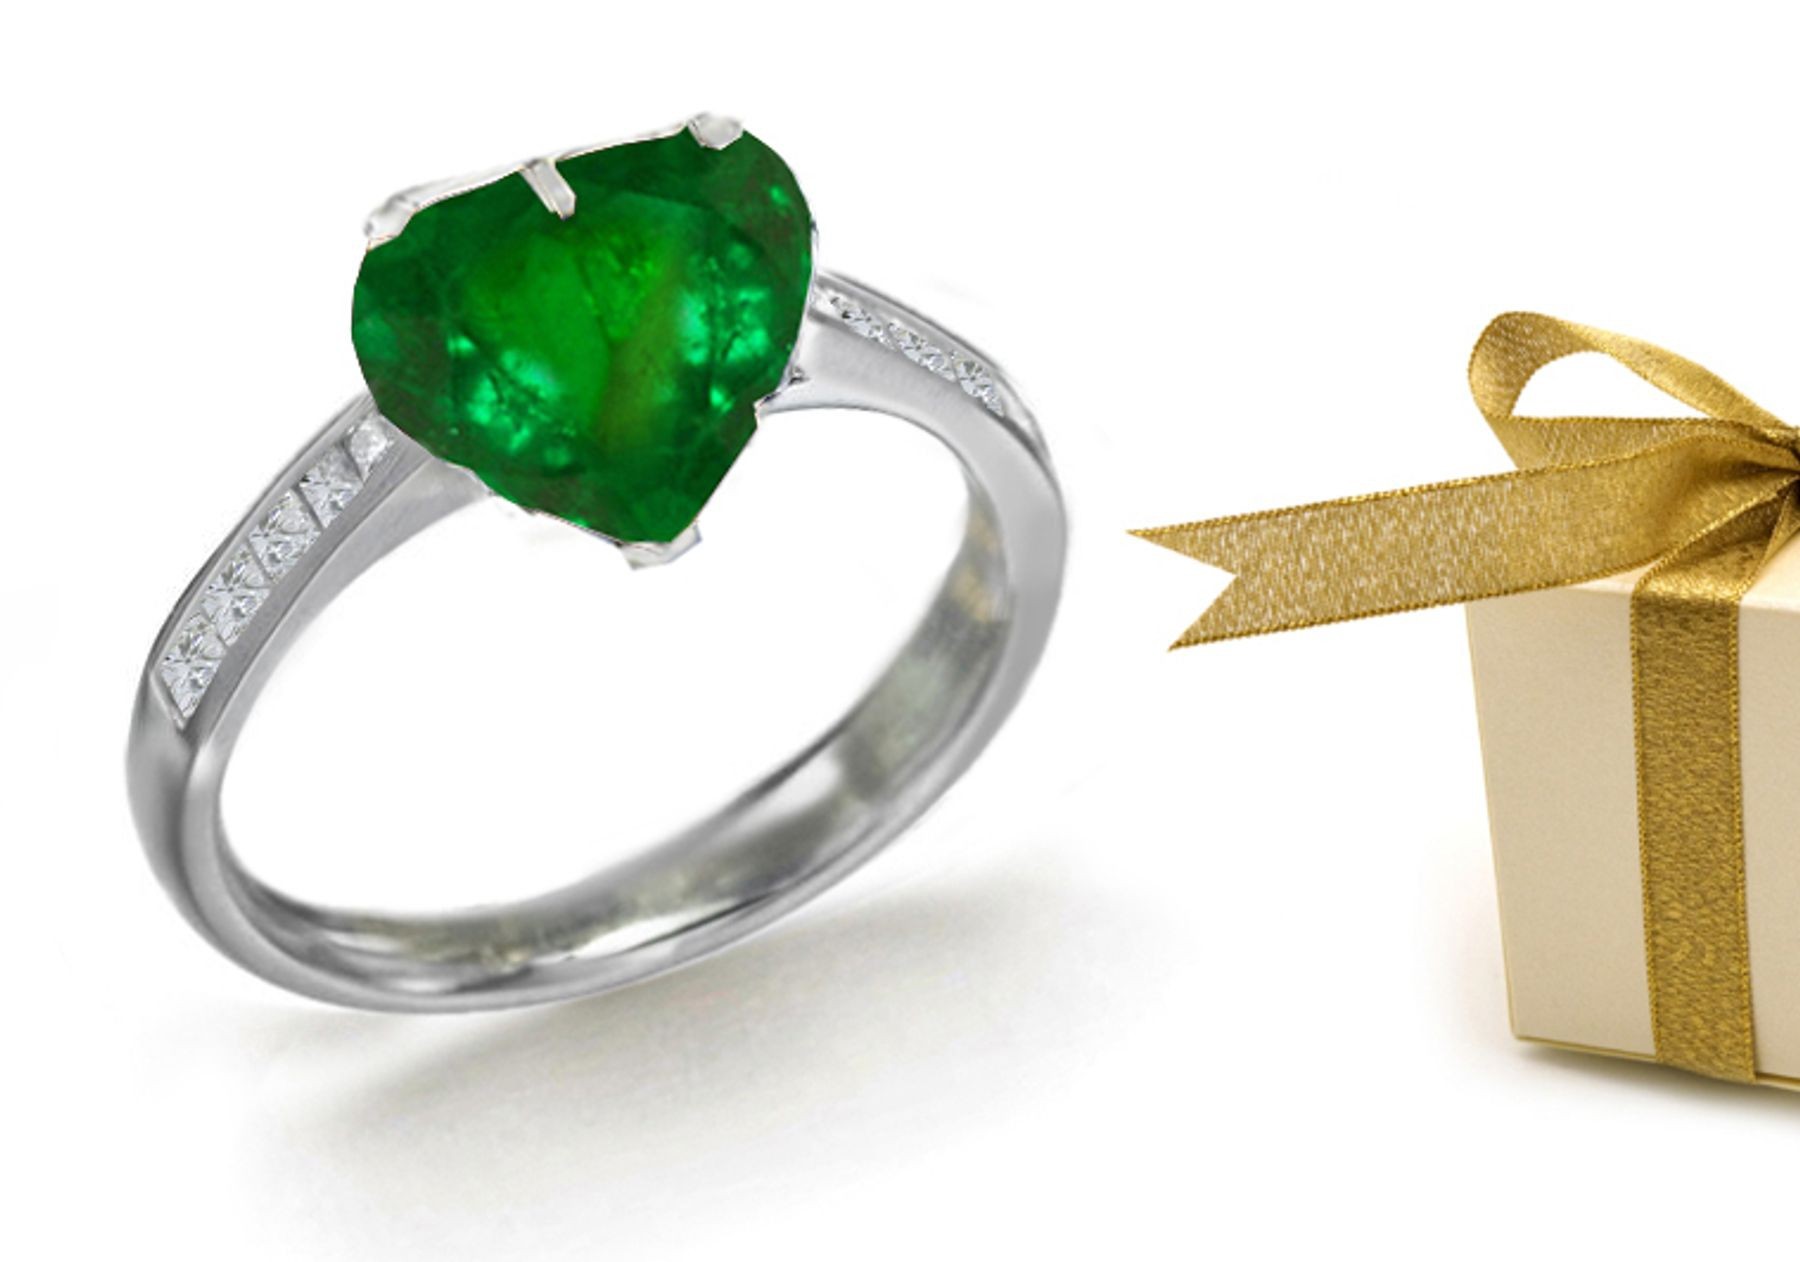 Stylistic Features: Center Heart Emerald Solitaire Platinum Ring with Side Diamond Accents